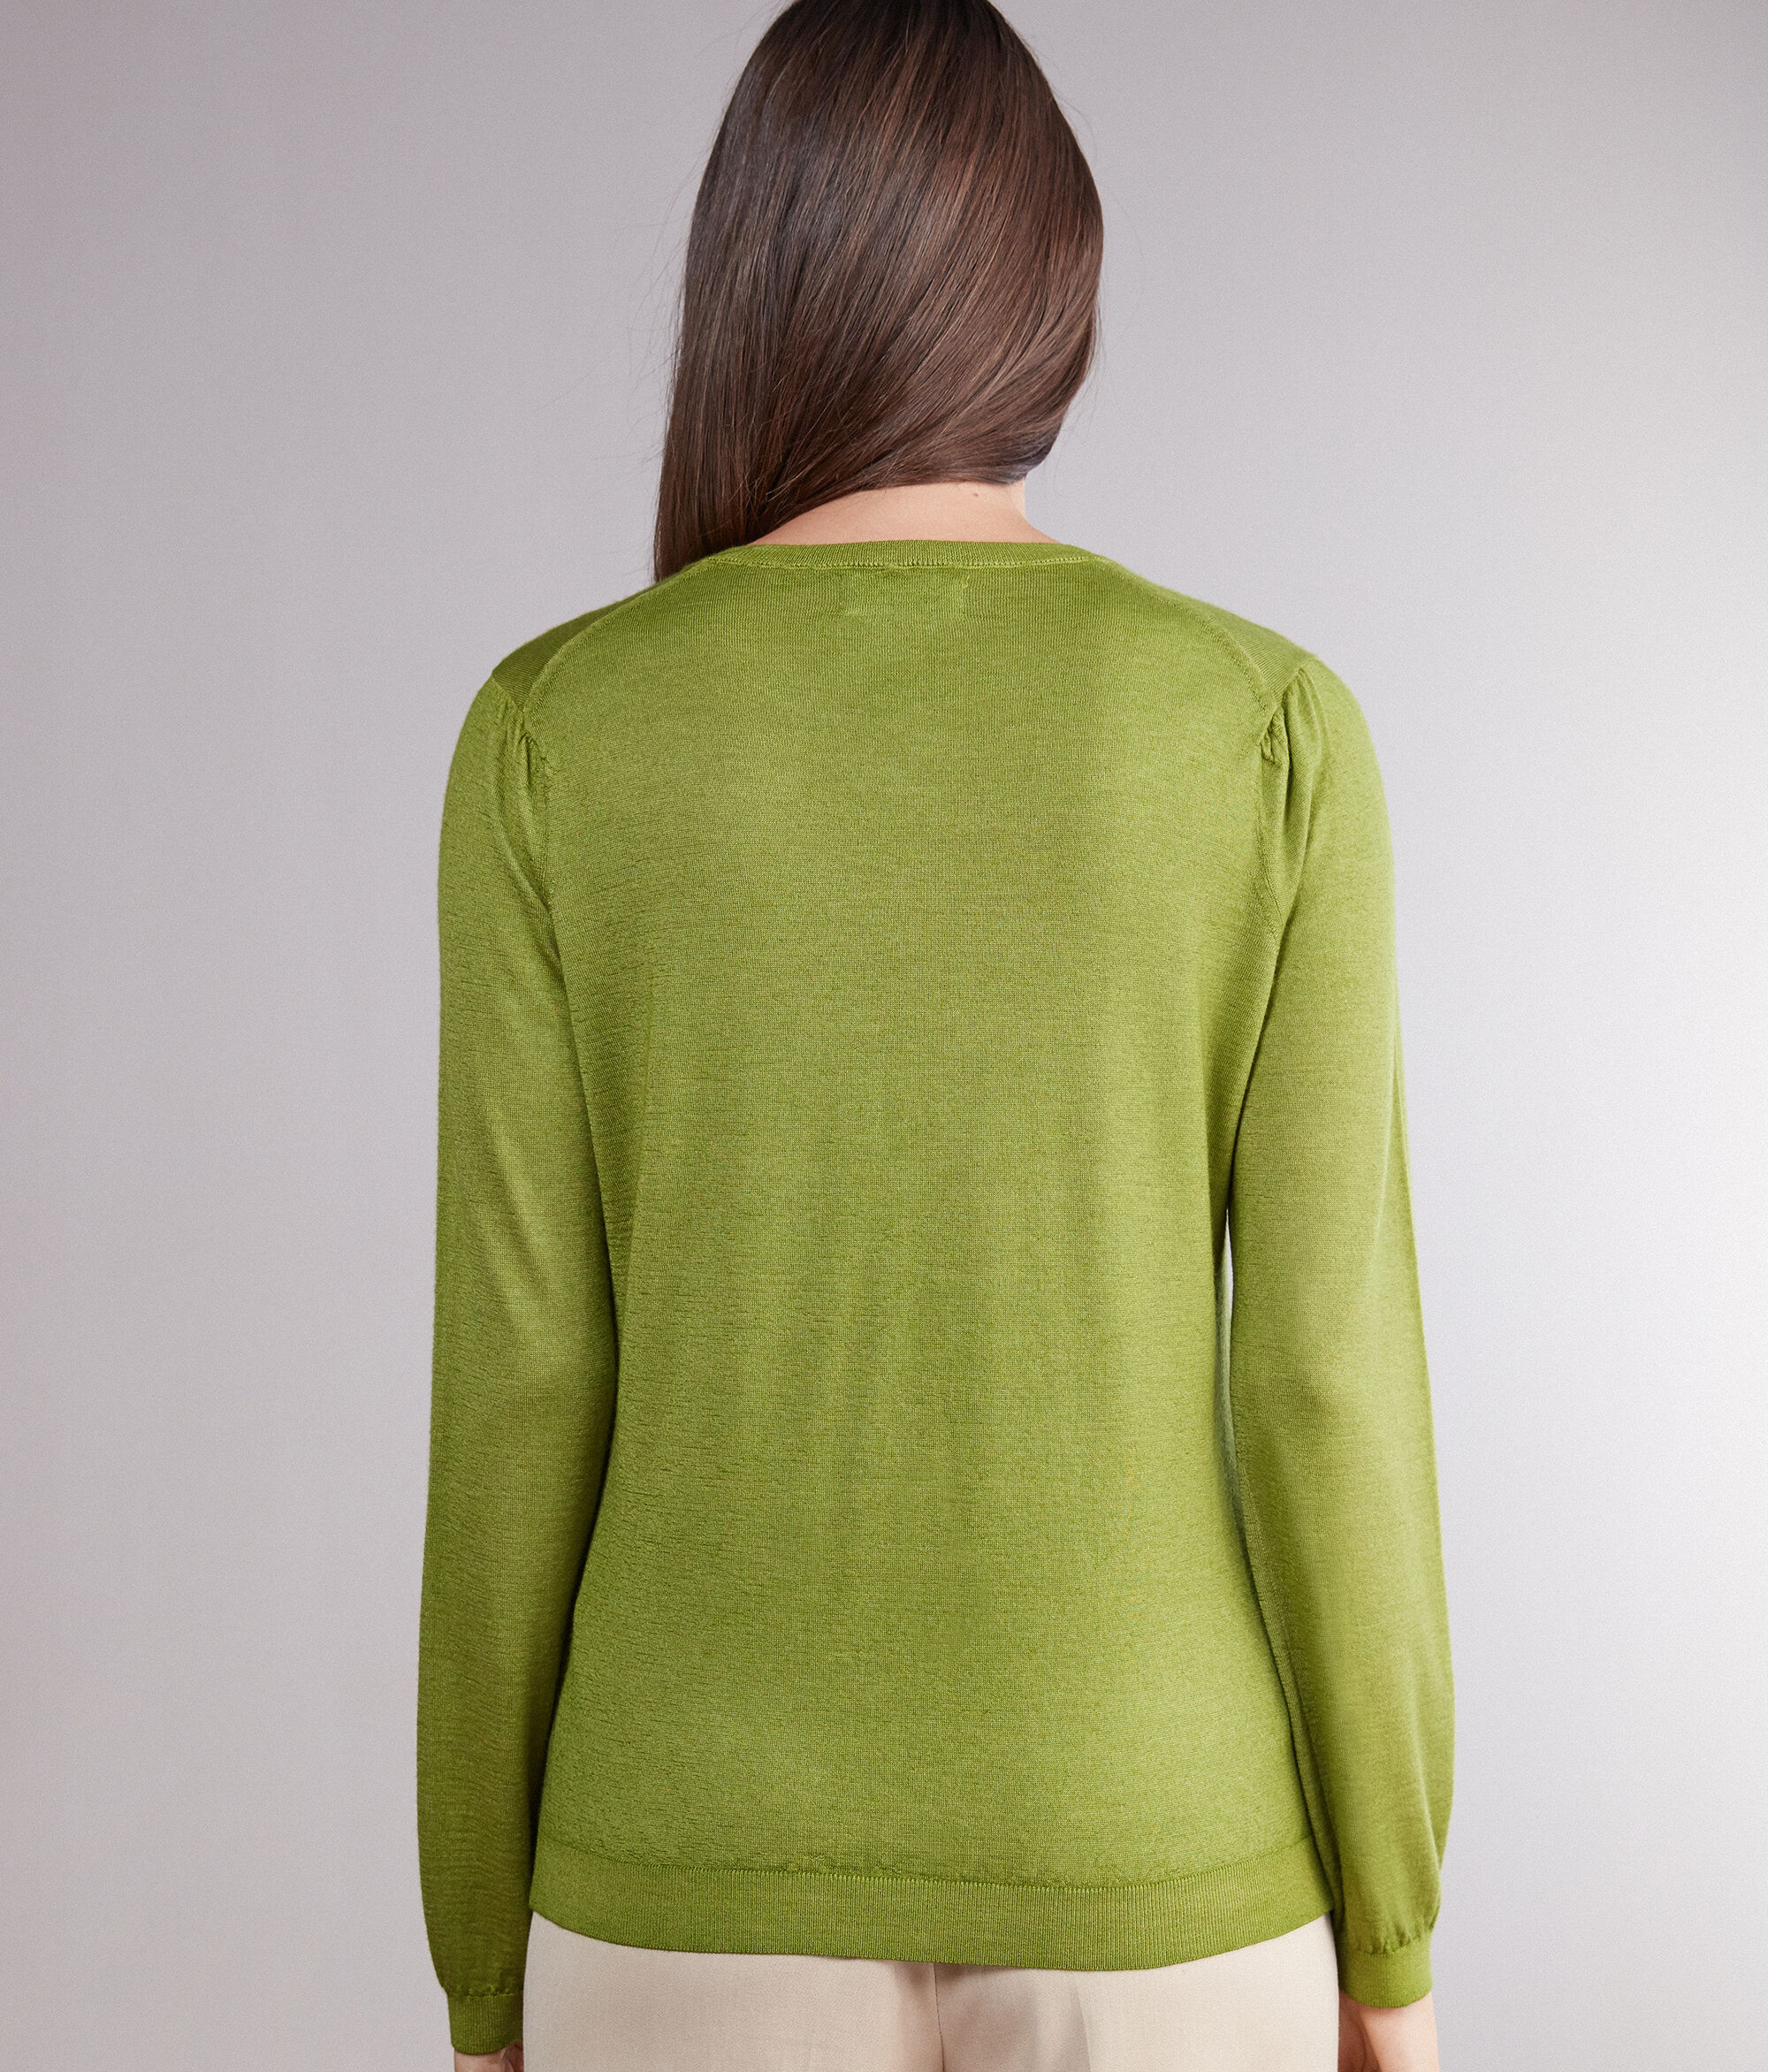 Ultrafine Cashmere Cardigan with Flounce Sleeves